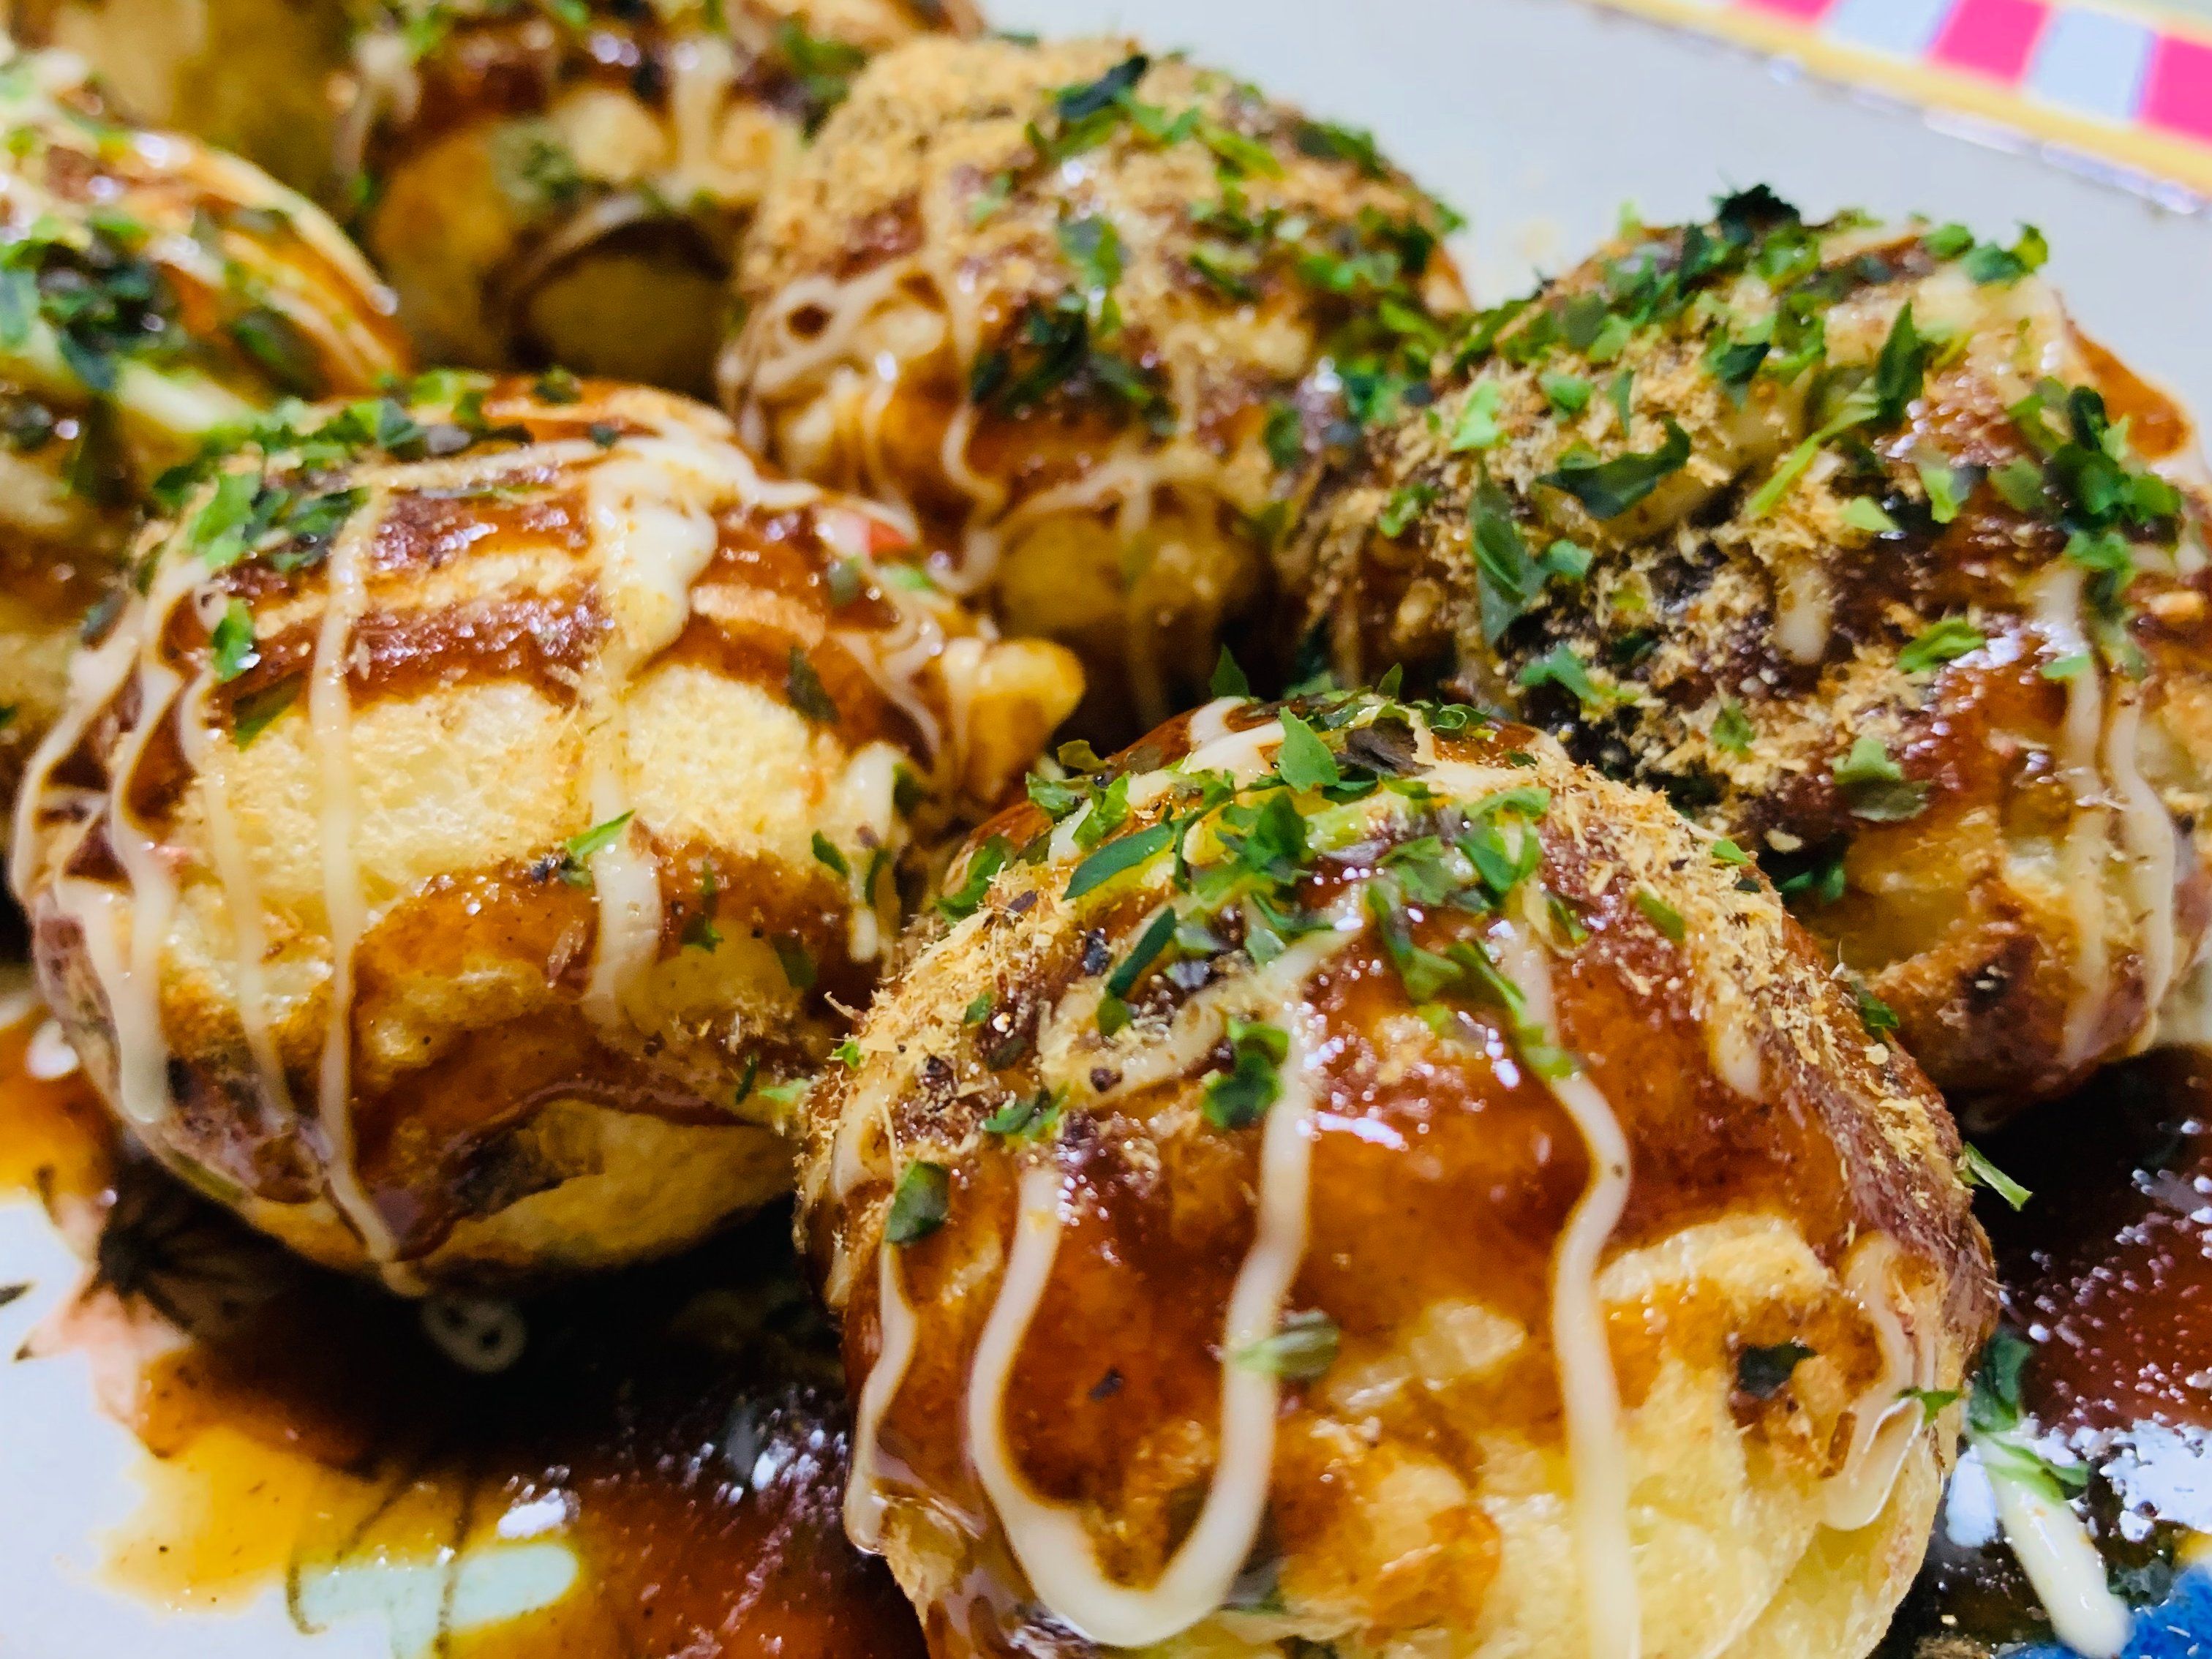 The Takoyaki Recipe to have you ROLLING IN DELIGHT 